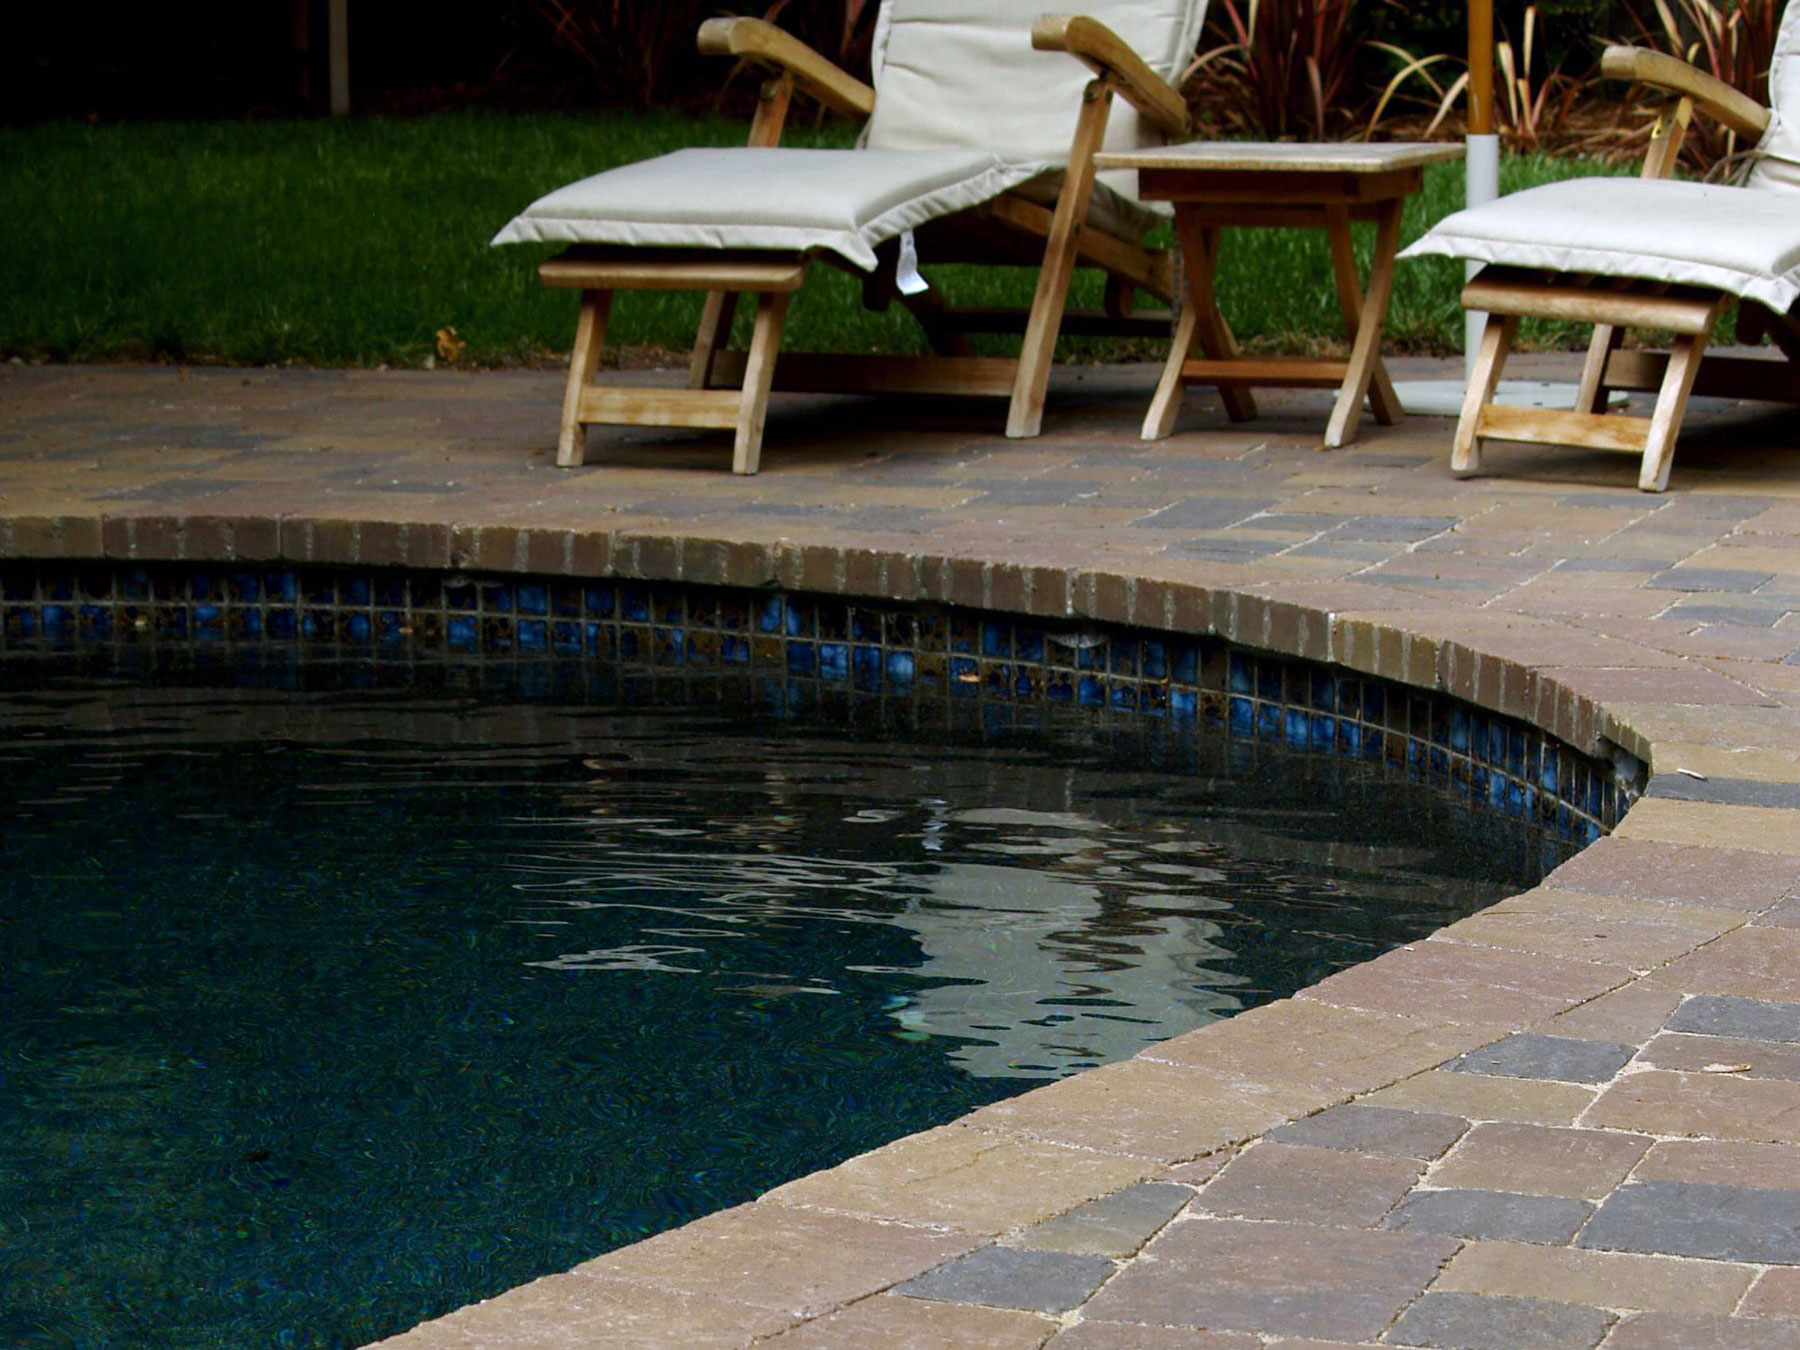 Swimming pool accented with stone pavers